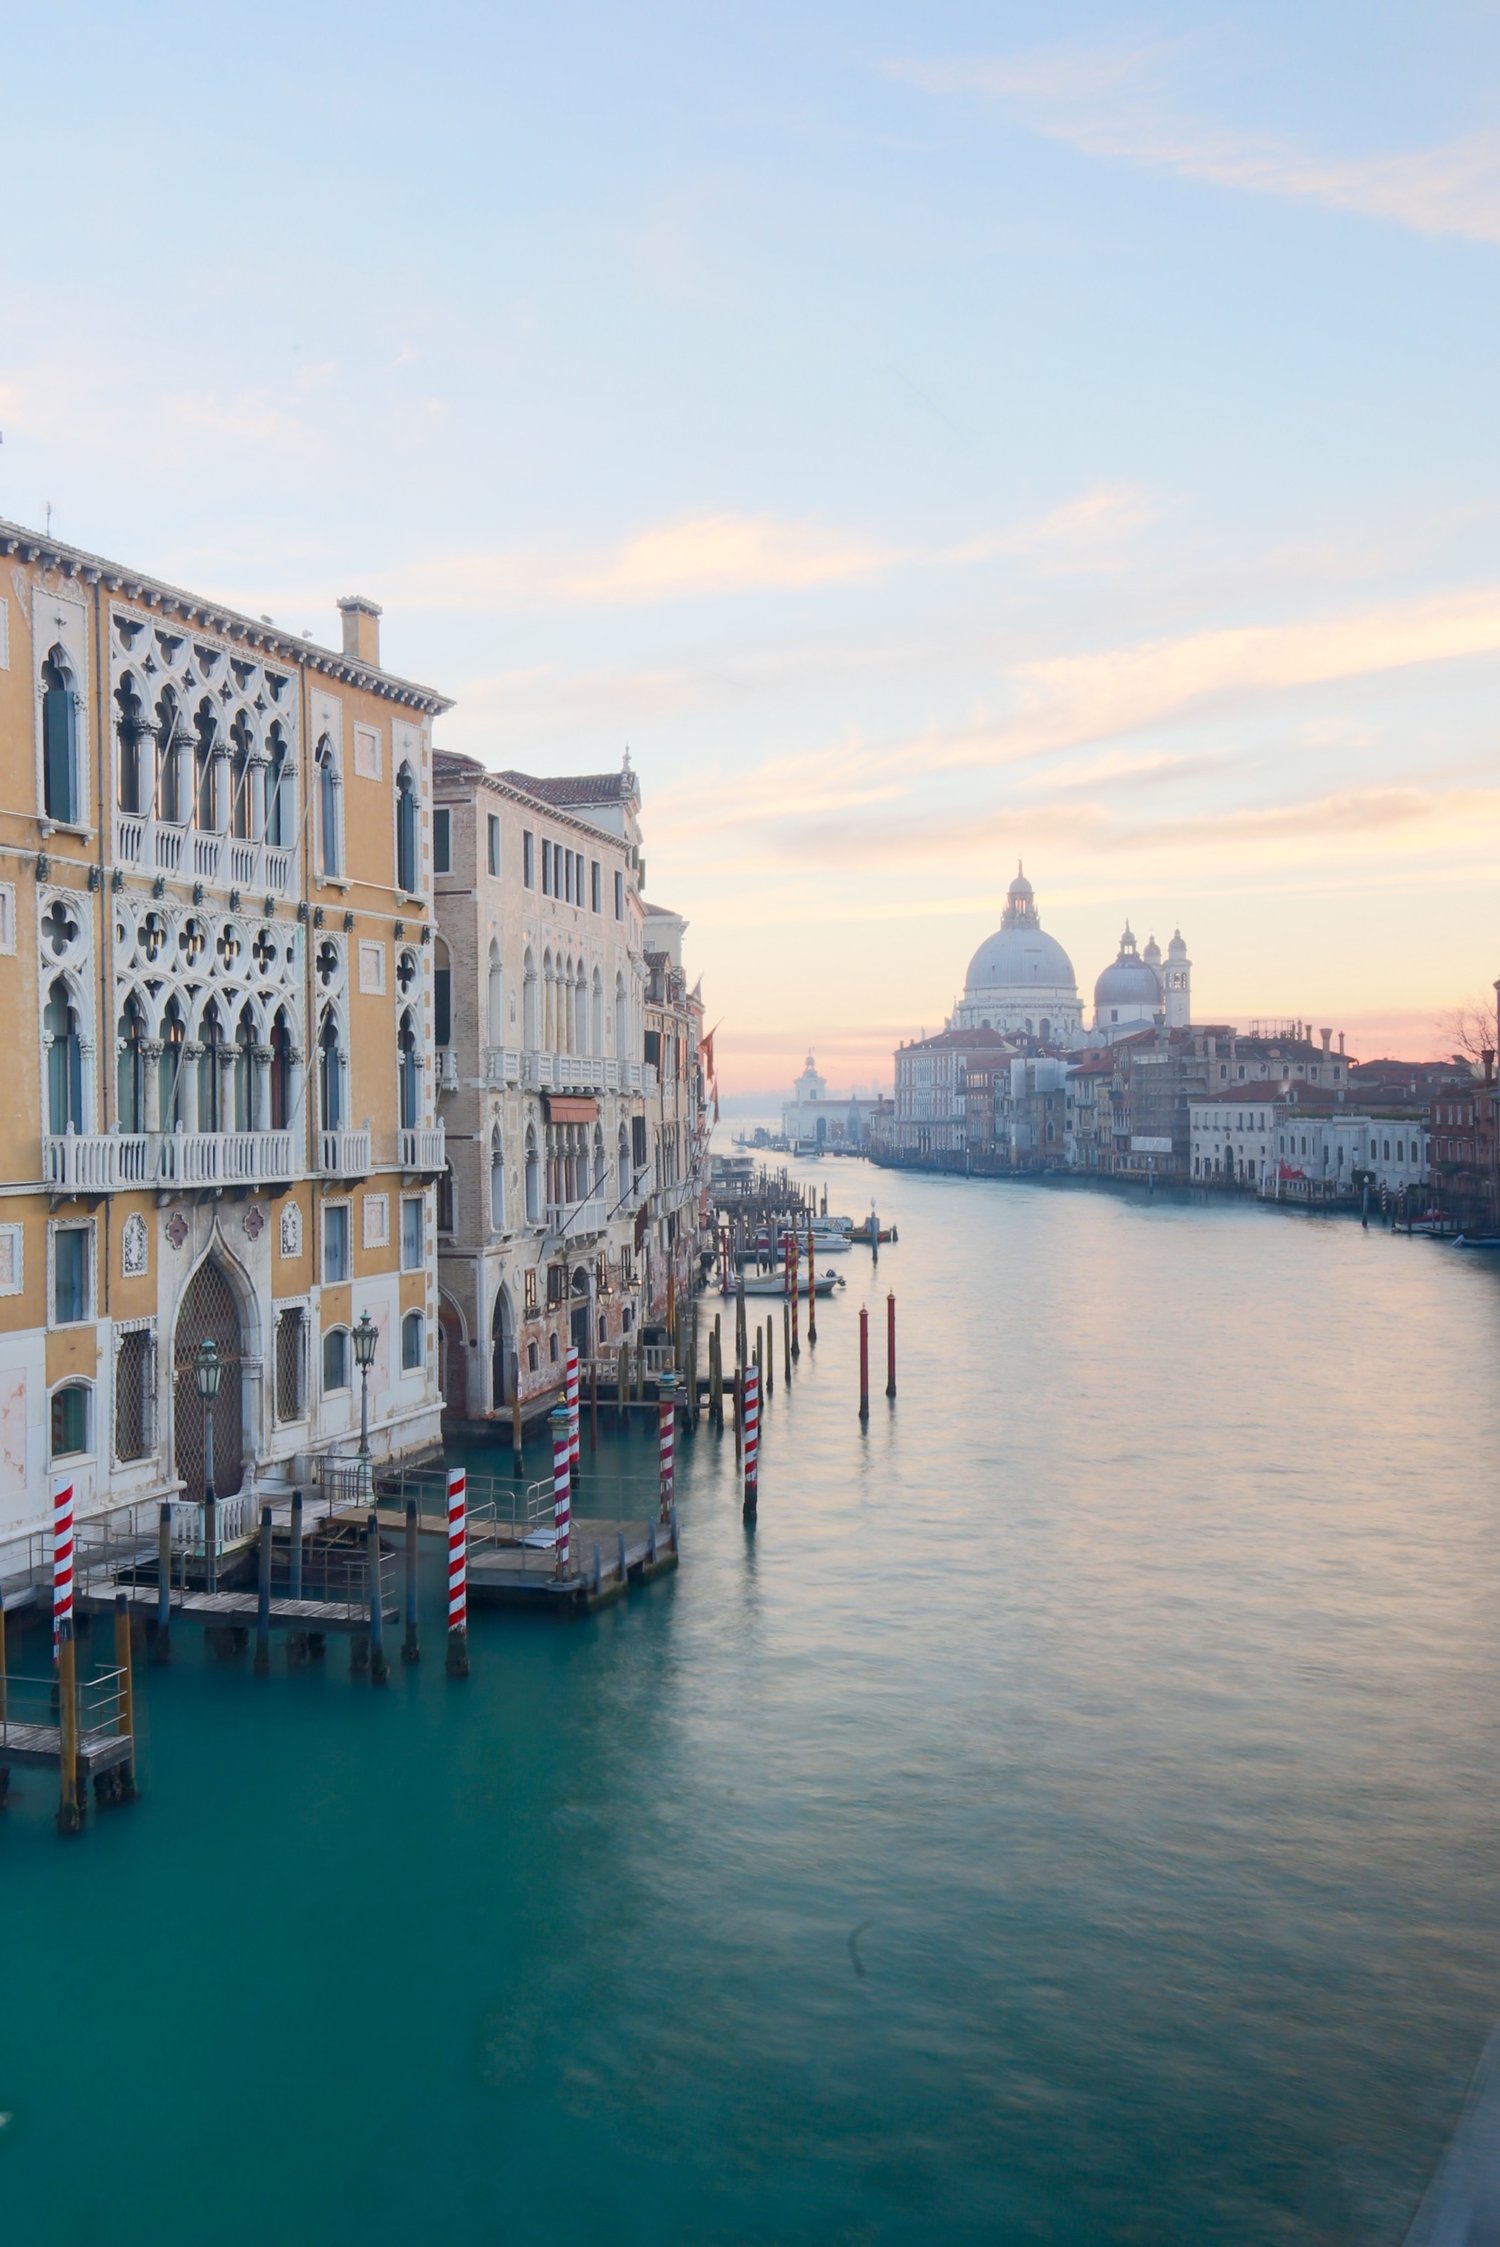 THE RICHES OF VENICE